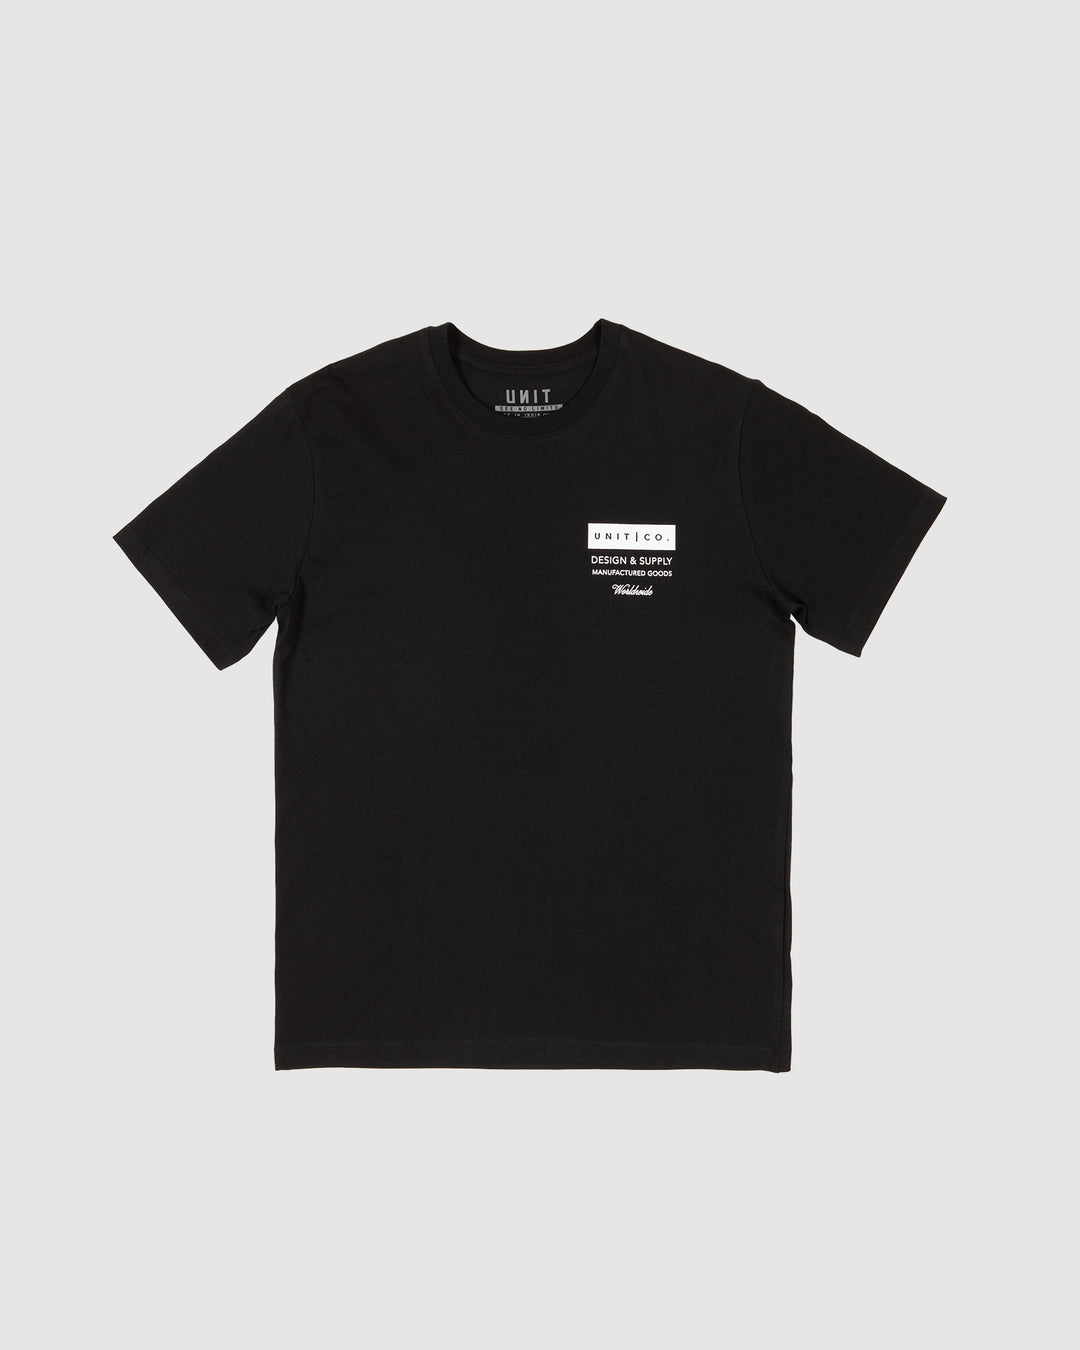 UNIT Plate Youth T-Shirt